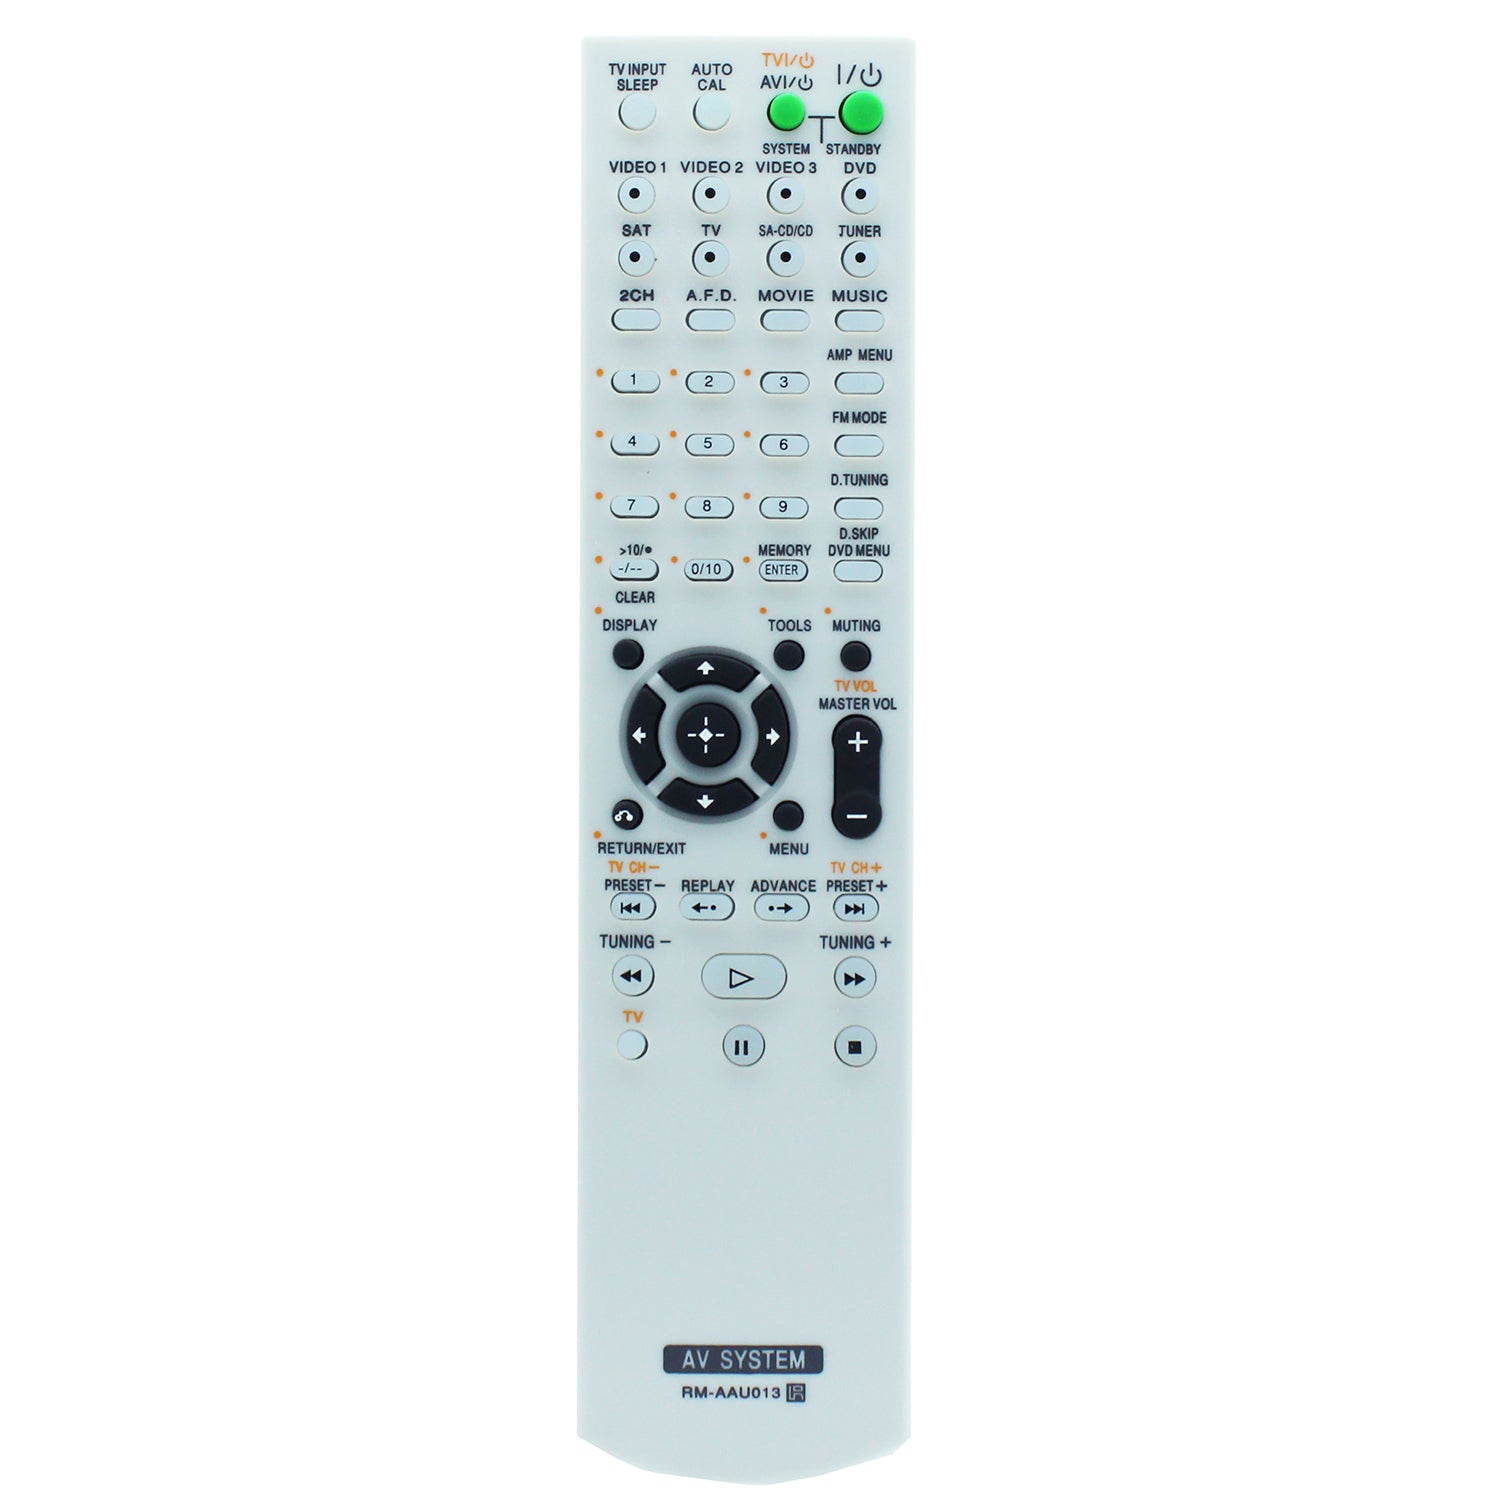 RM-AAU013 Remote Control Replacement for Sony AV Receiver